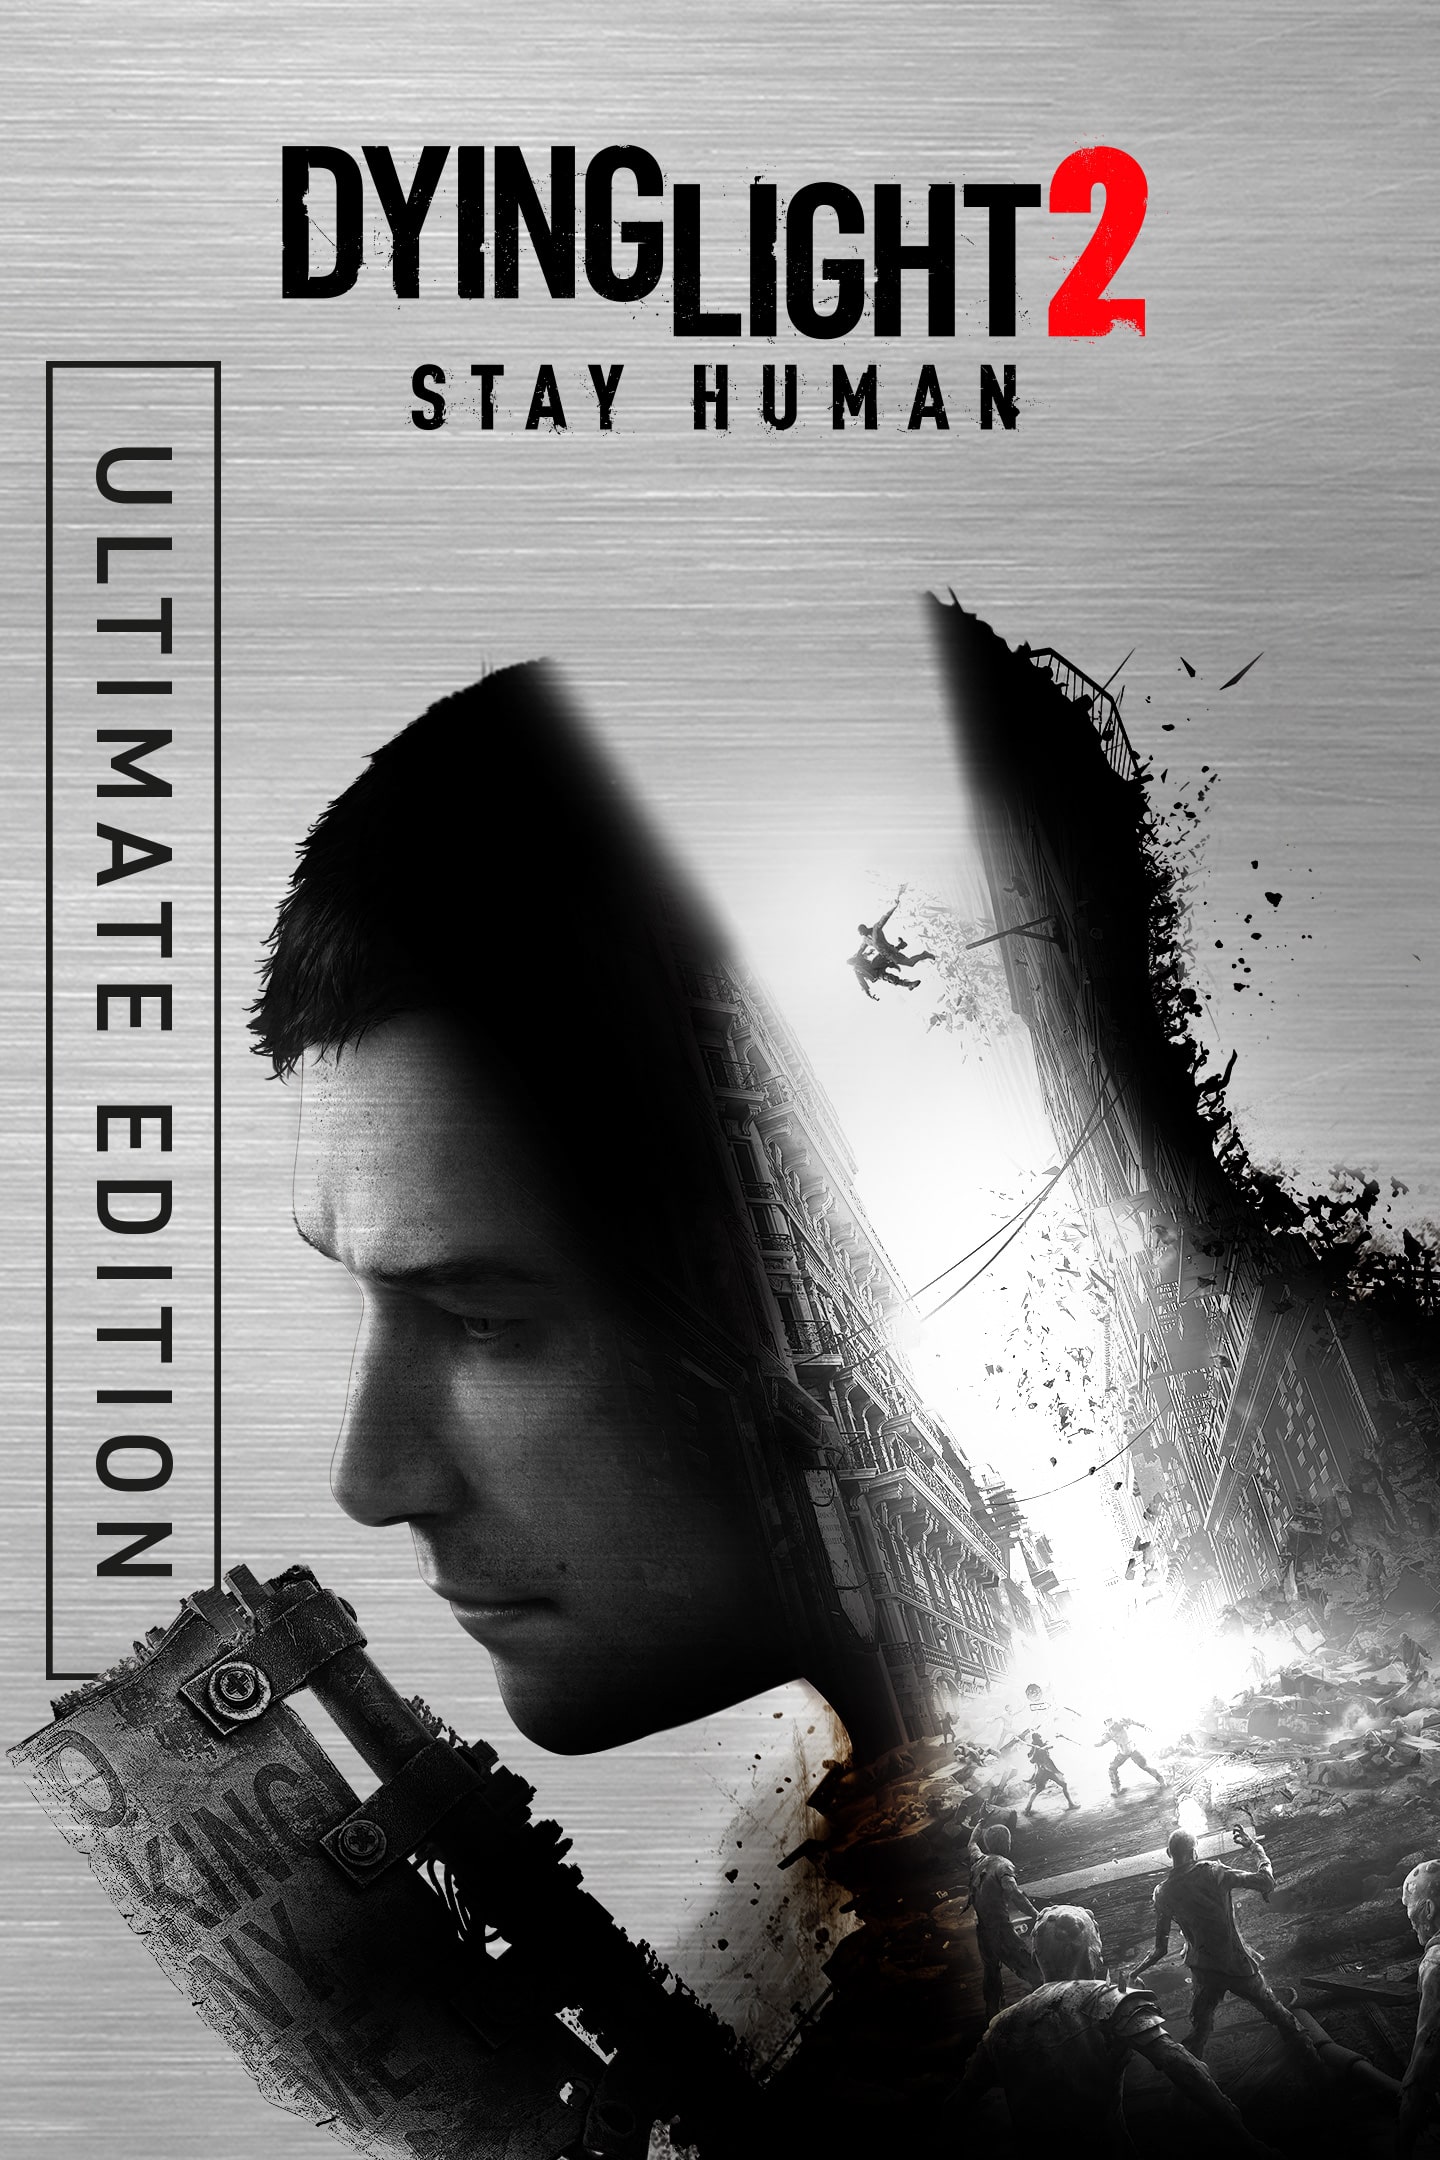 Buy Dying Light 2 Stay Human - Ultimate Edition from the Humble Store